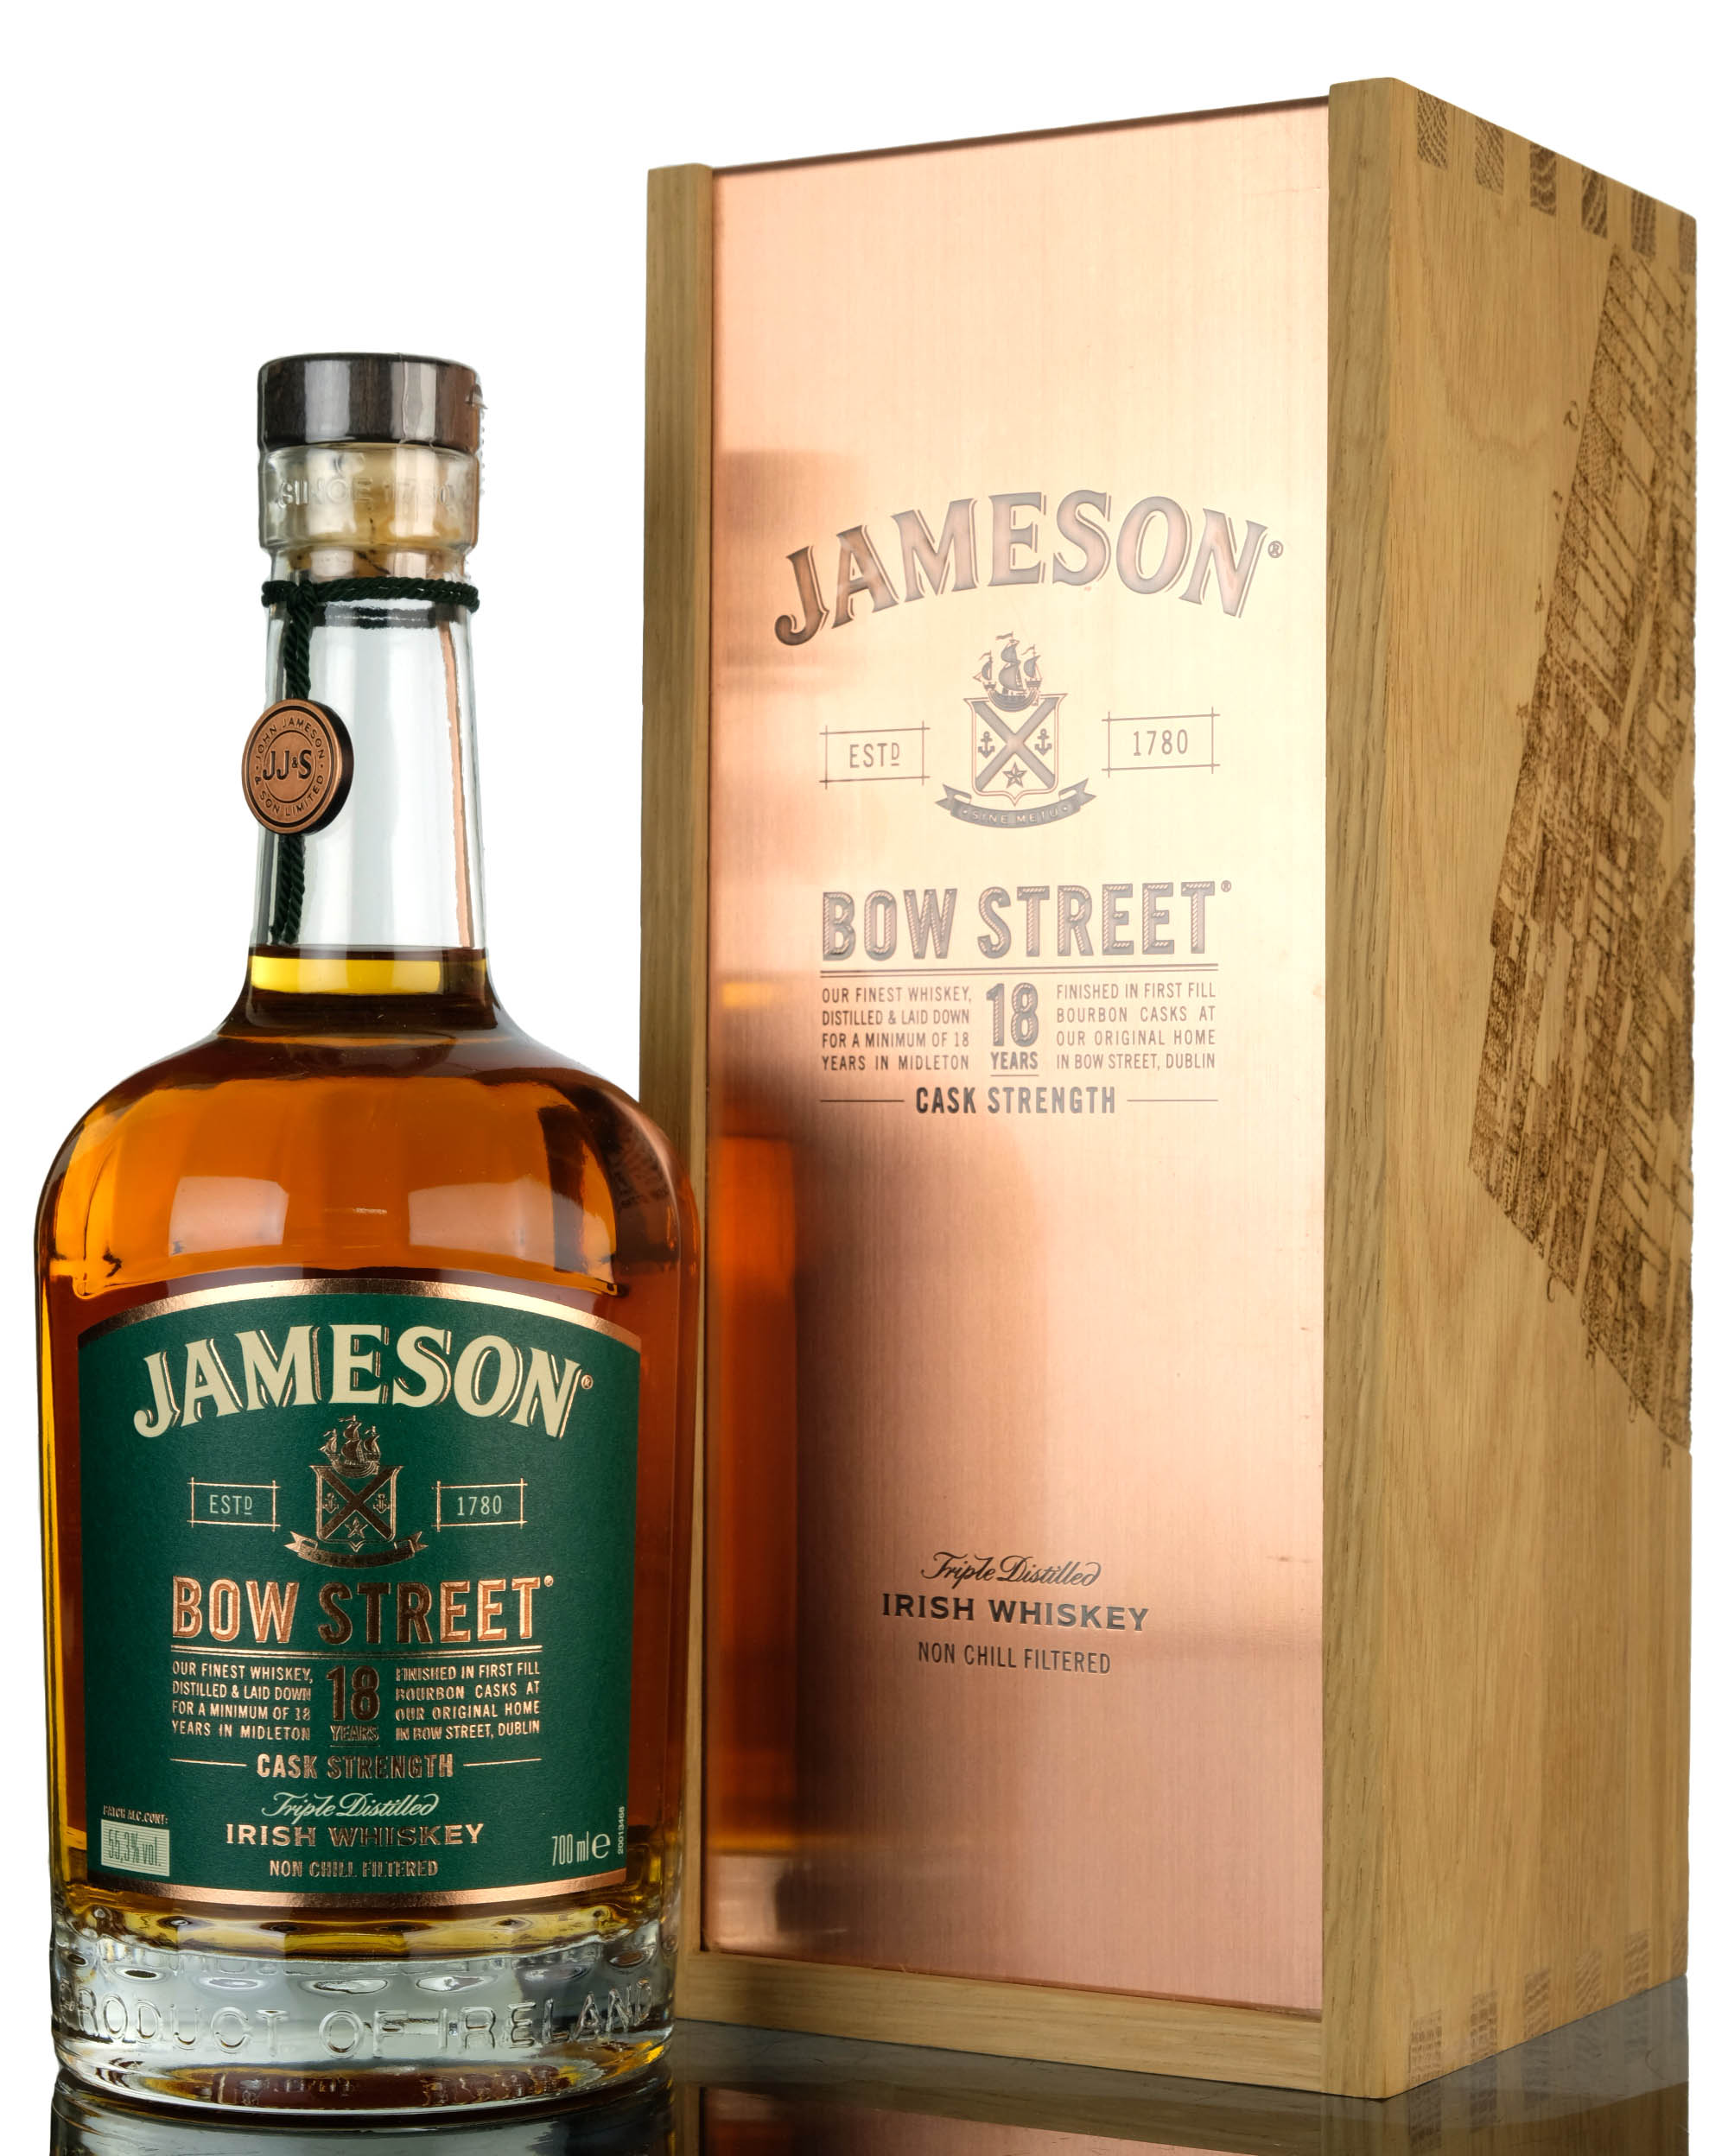 Jameson 18 Year Old - Bow Street Cask Strength - Batch 1 - 2018 Release